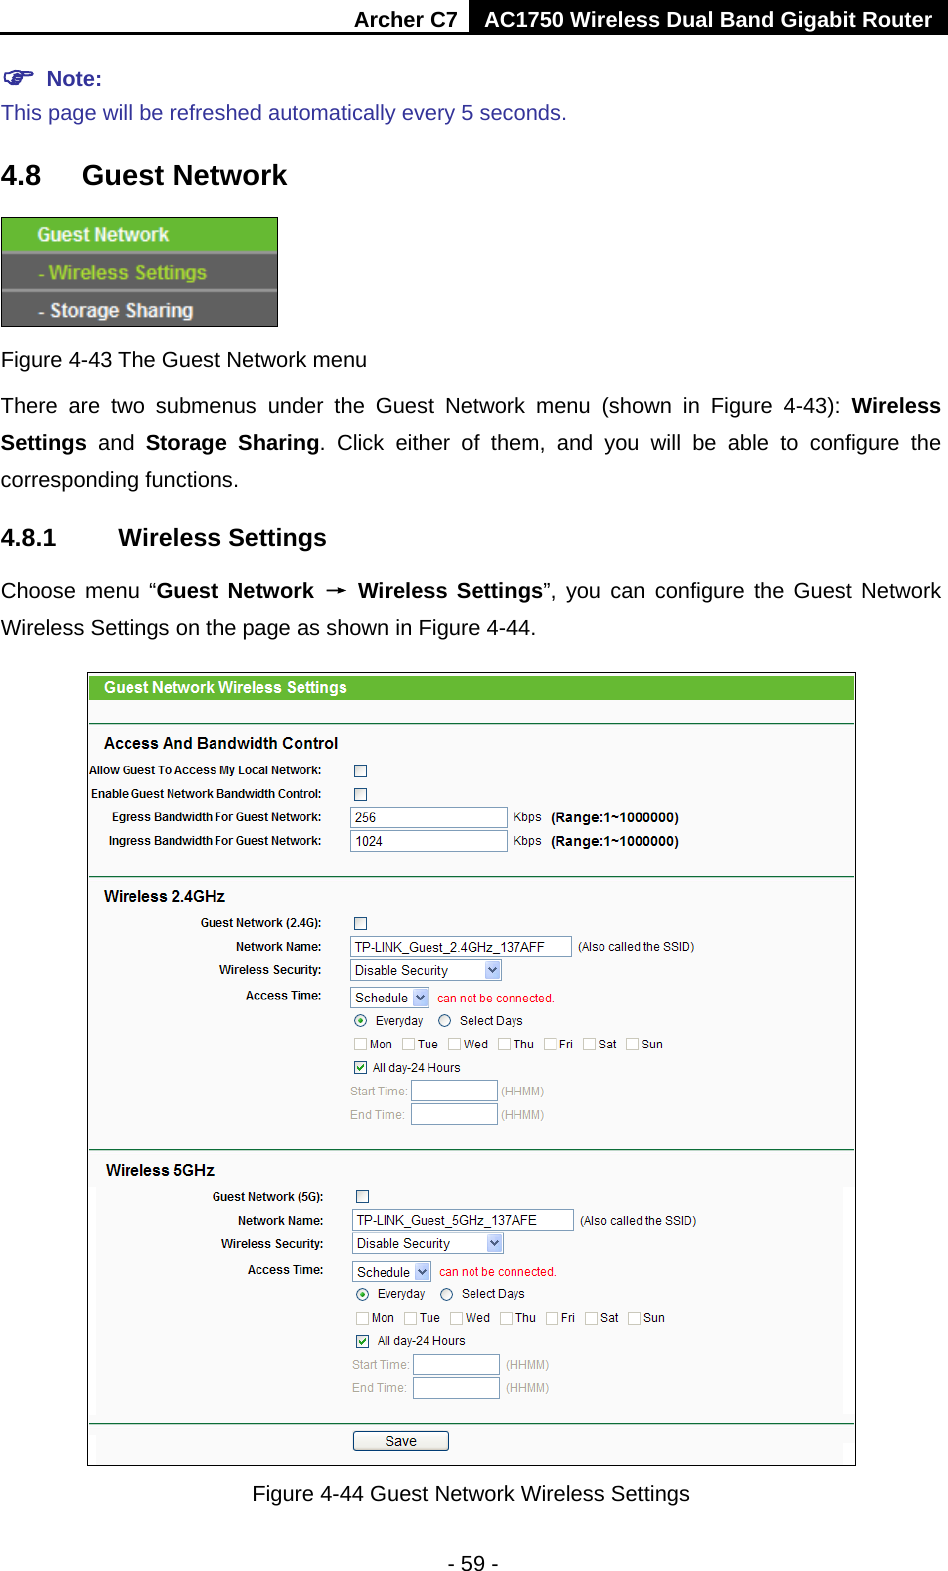 Archer C7 AC1750 Wireless Dual Band Gigabit Router  - 59 -  Note:   This page will be refreshed automatically every 5 seconds. 4.8 Guest Network  Figure 4-43 The Guest Network menu There are  two submenus under the Guest Network menu (shown in Figure  4-43):  Wireless Settings  and  Storage Sharing. Click  either of them, and you will be able to configure the corresponding functions. 4.8.1 Wireless Settings Choose menu “Guest Network → Wireless Settings”, you can configure the Guest Network Wireless Settings on the page as shown in Figure 4-44.  Figure 4-44 Guest Network Wireless Settings 